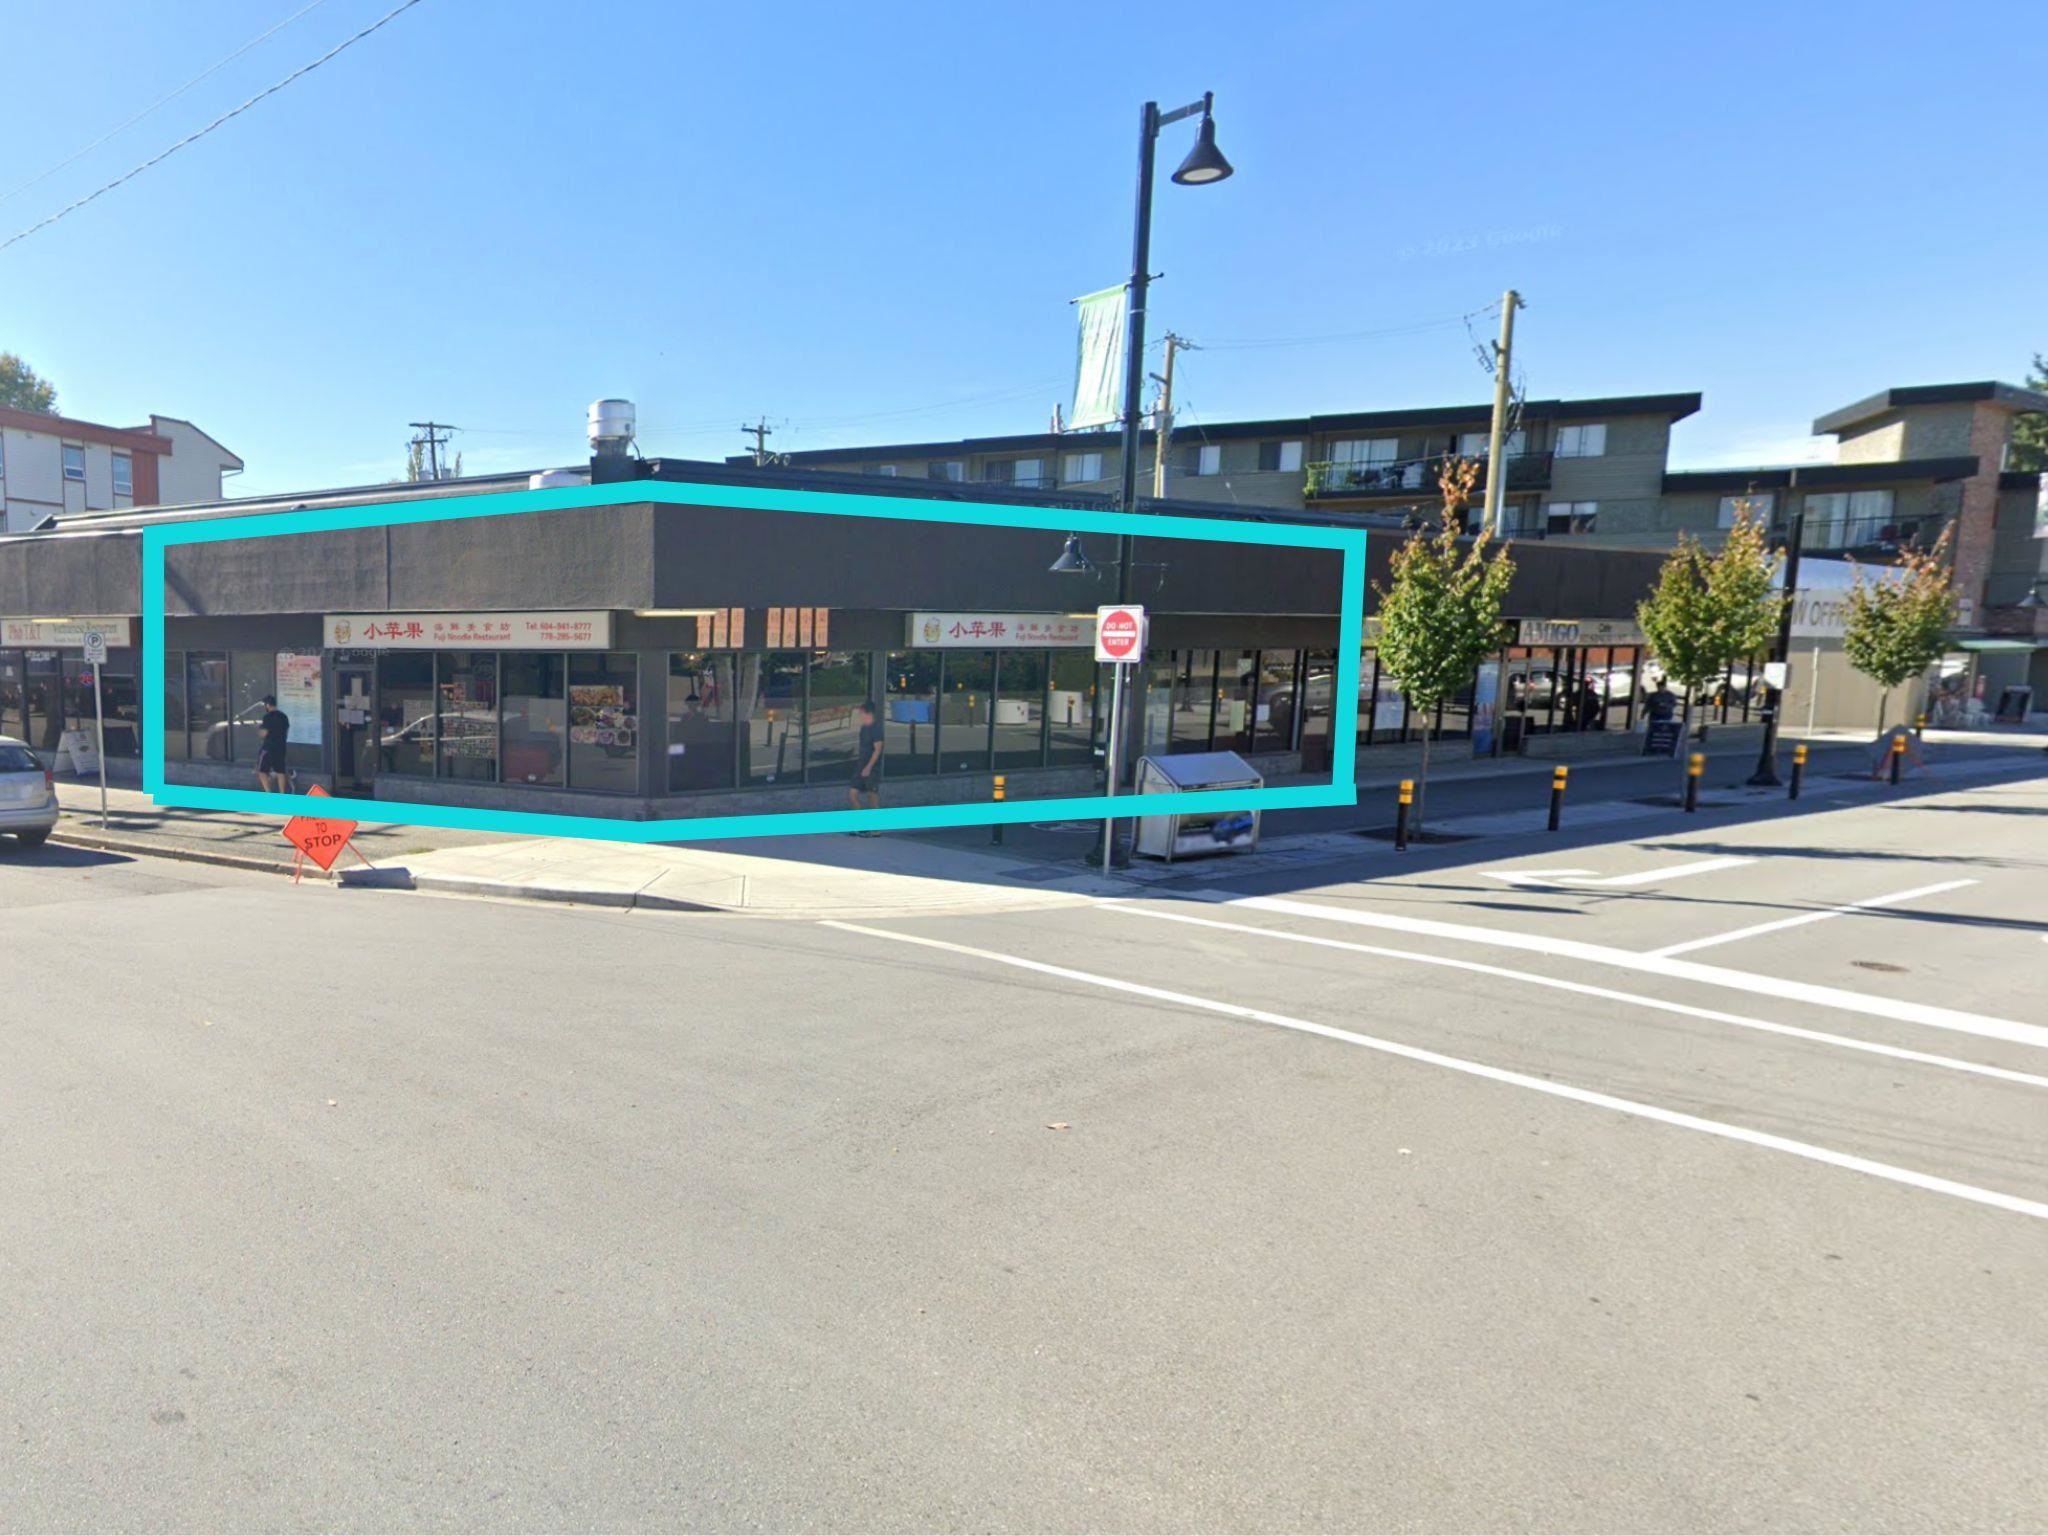 Central Pt Coquitlam Land Commercial for sale:    (Listed 6800-05-18)